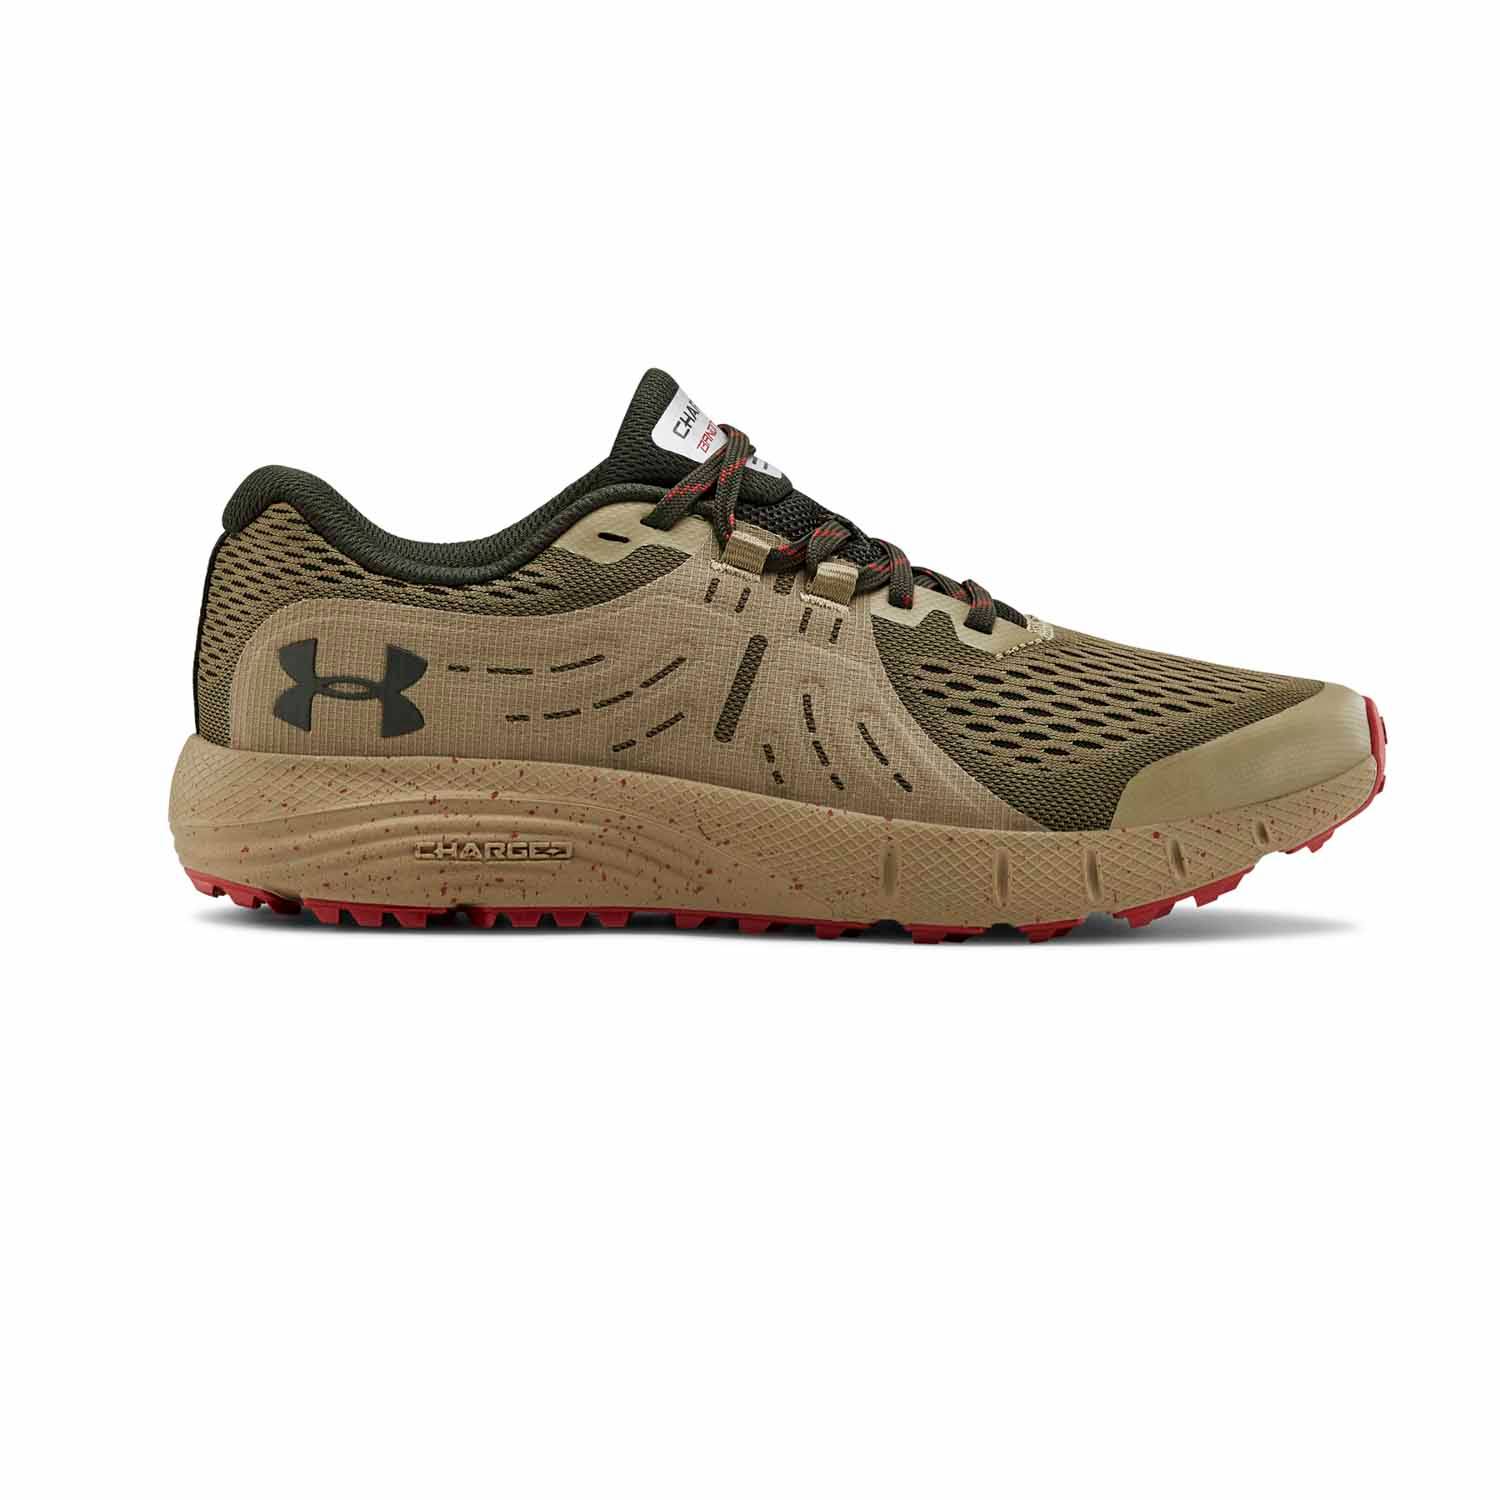 under armour slip on sneakers